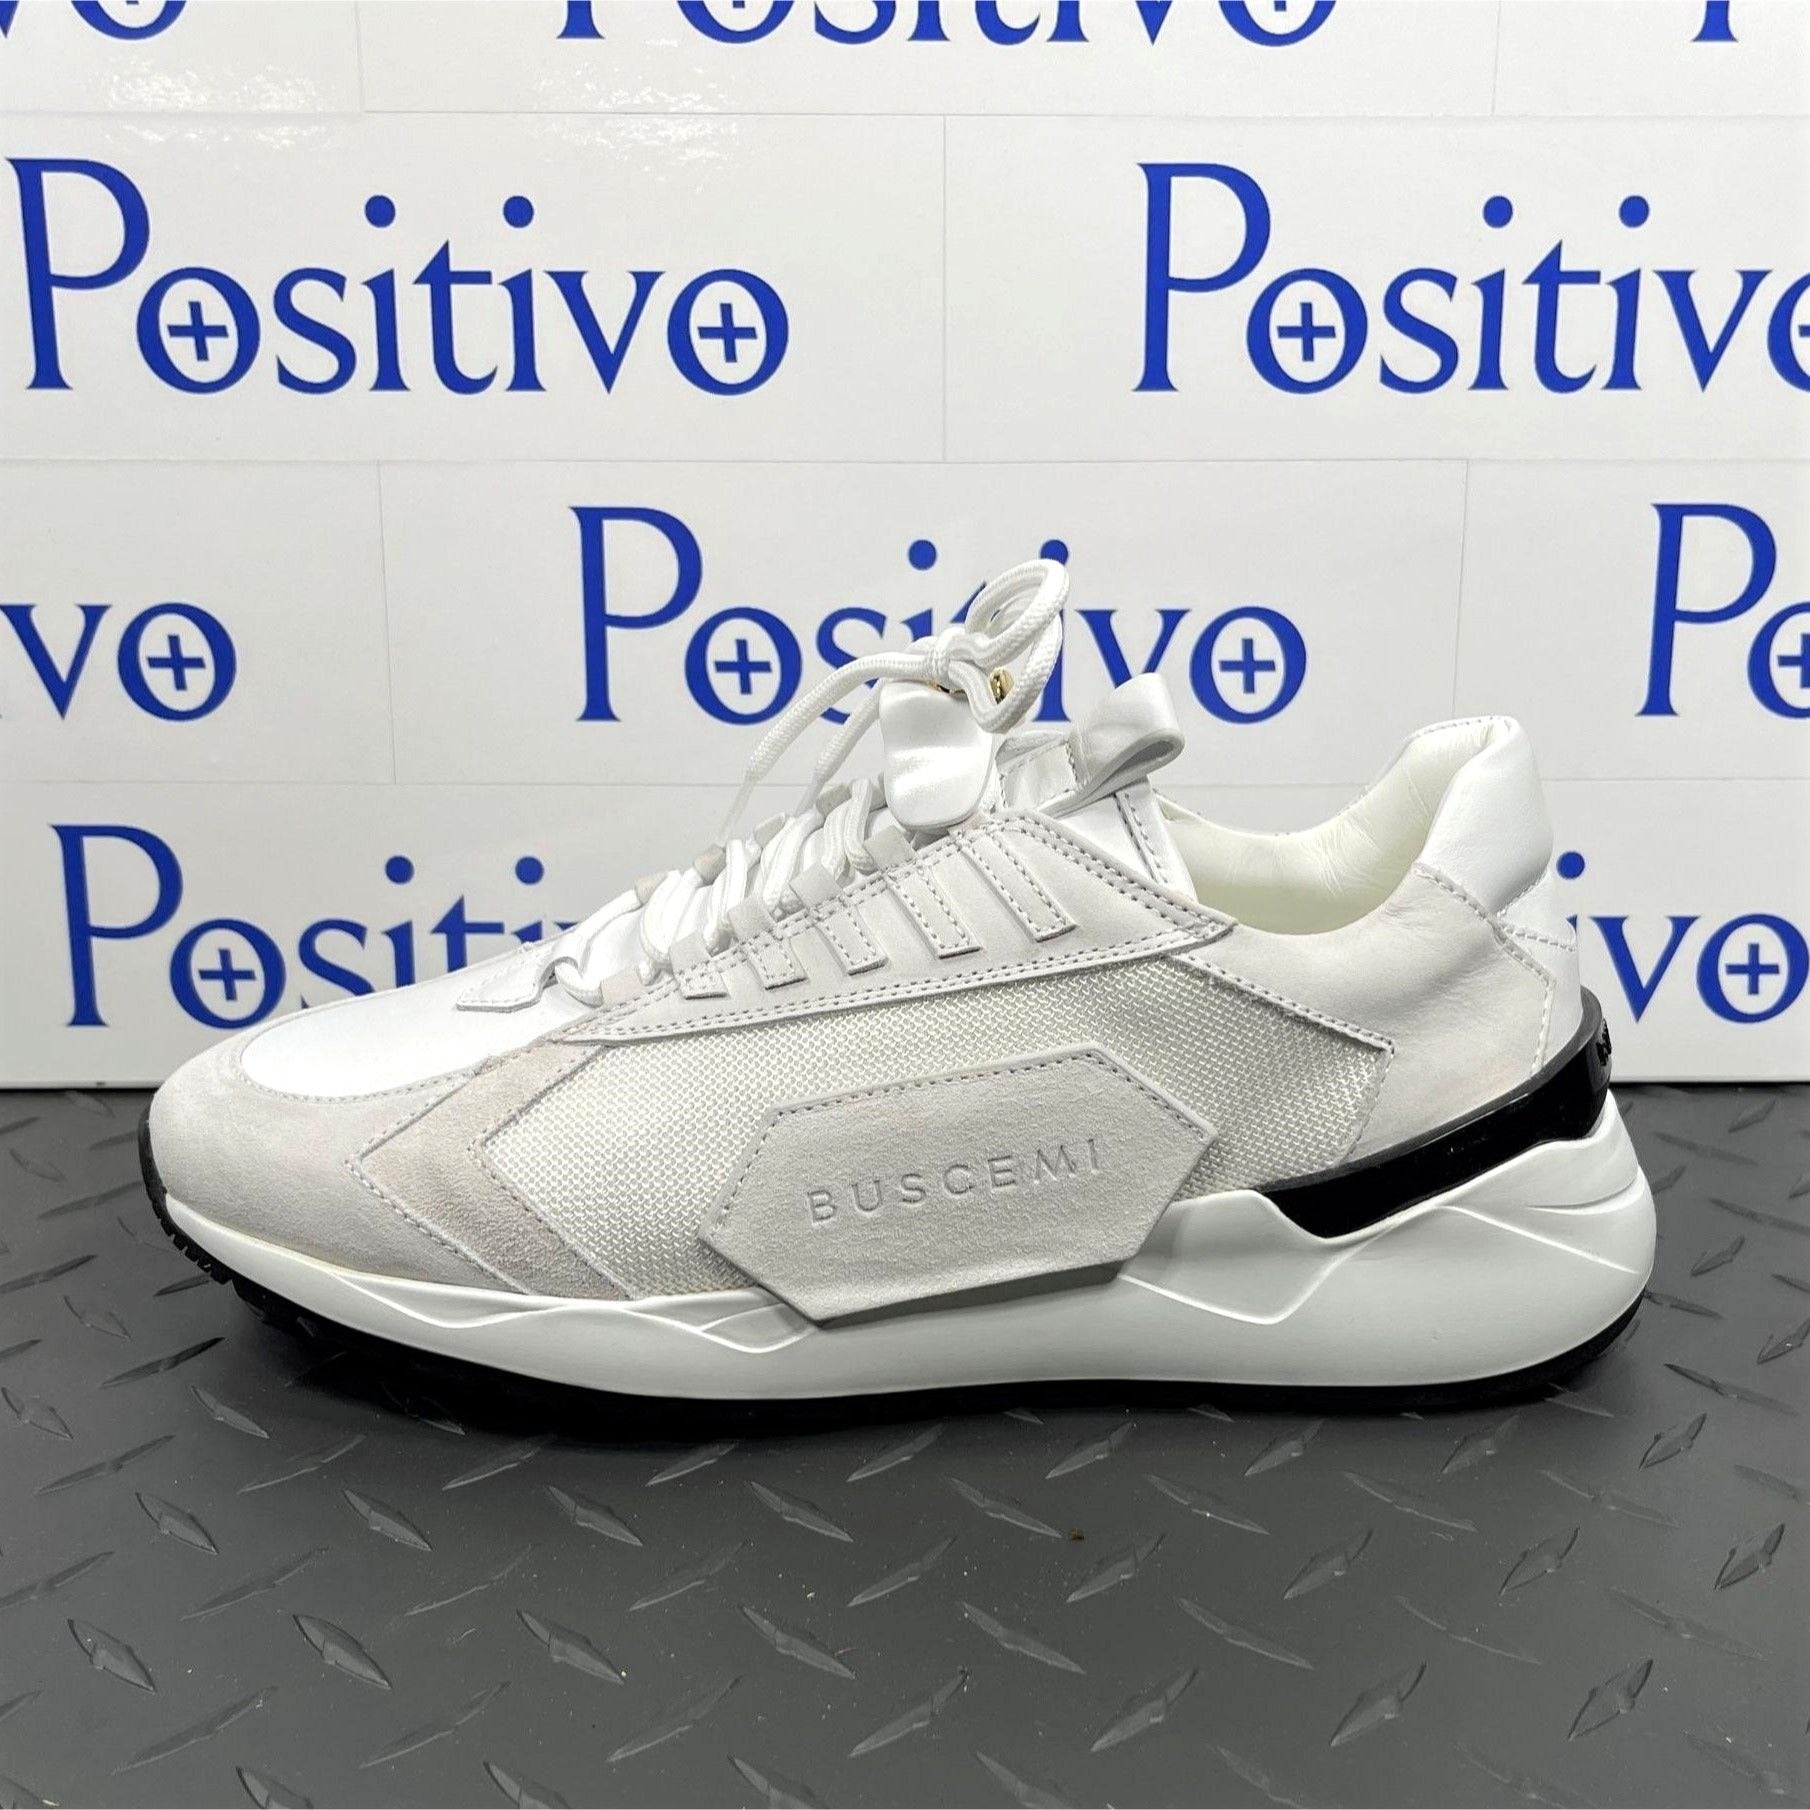 Buscemi Mens Run 2 White Suede Sneakers | Positivo Clothing